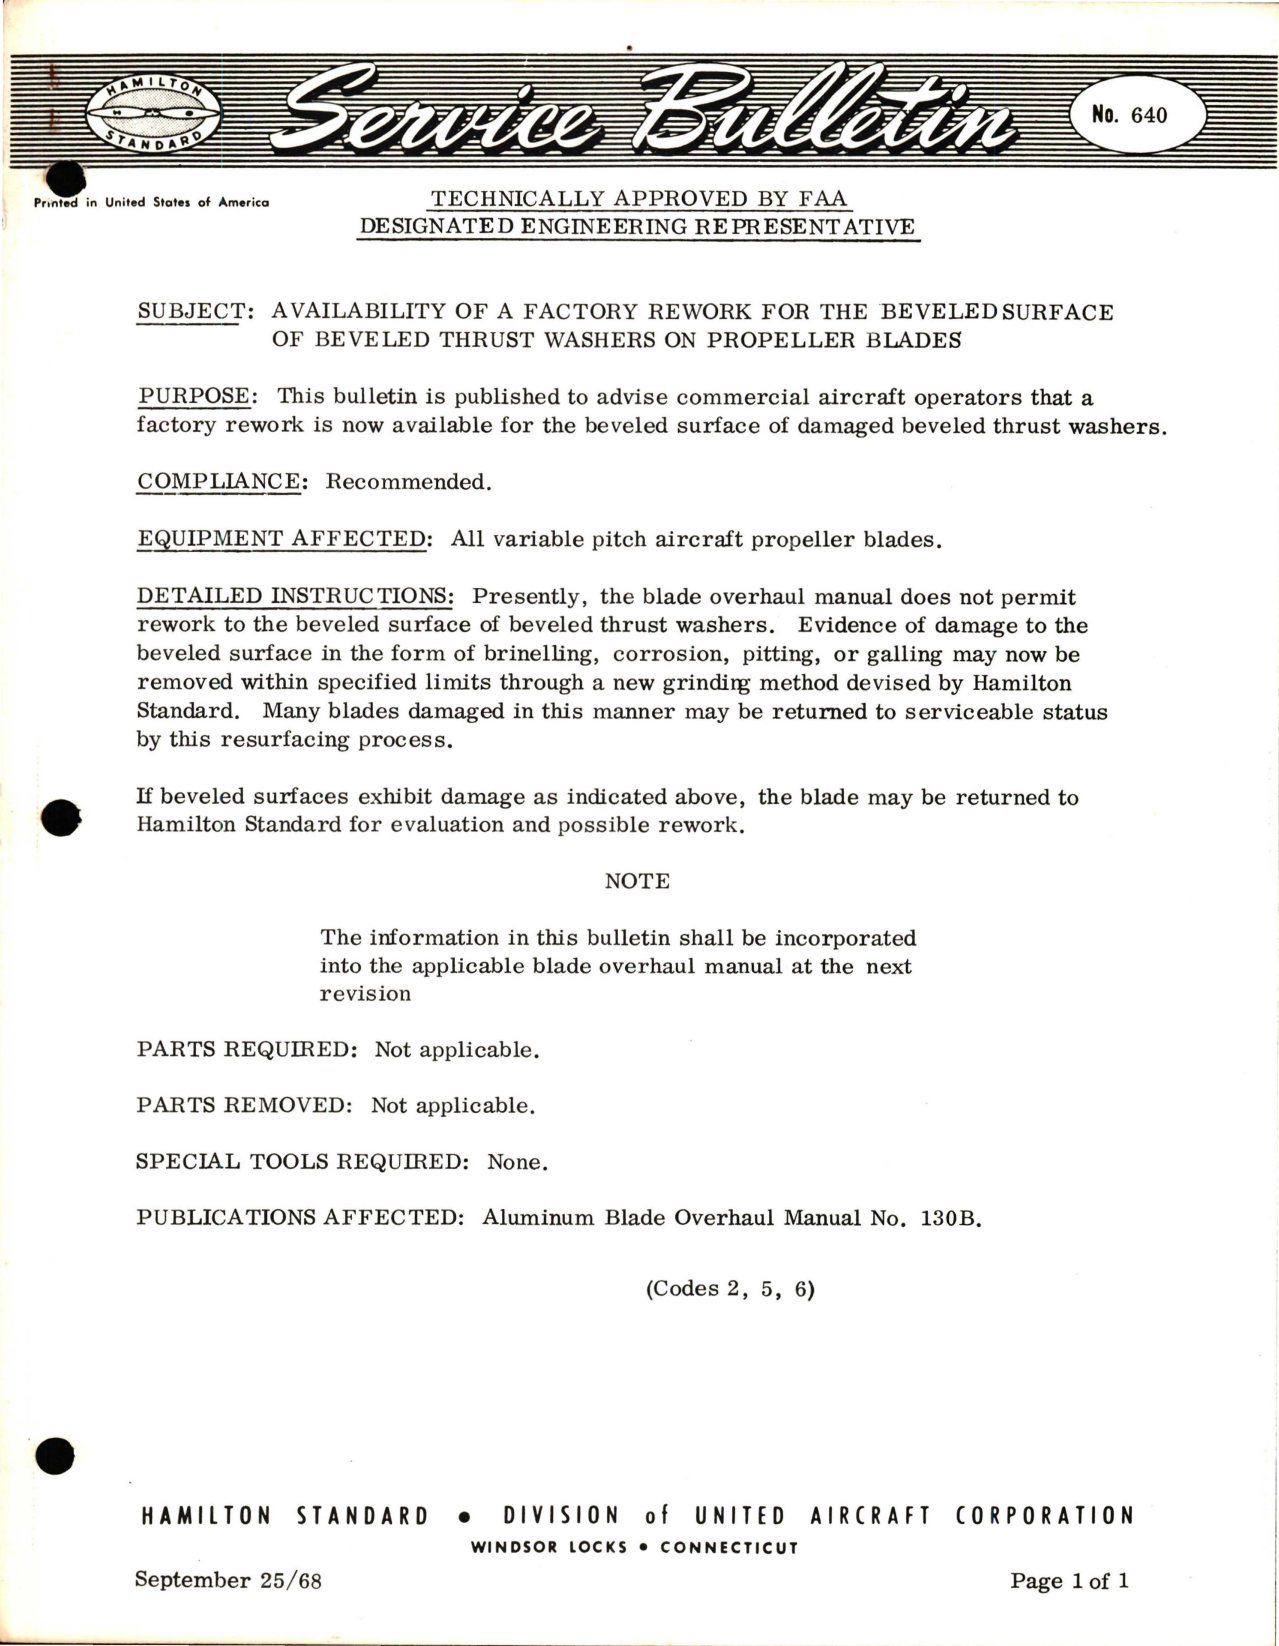 Sample page 1 from AirCorps Library document: Availability of a Factory Rework for the Beveled Surface of Beveled Thrust Washers on Propeller Blades